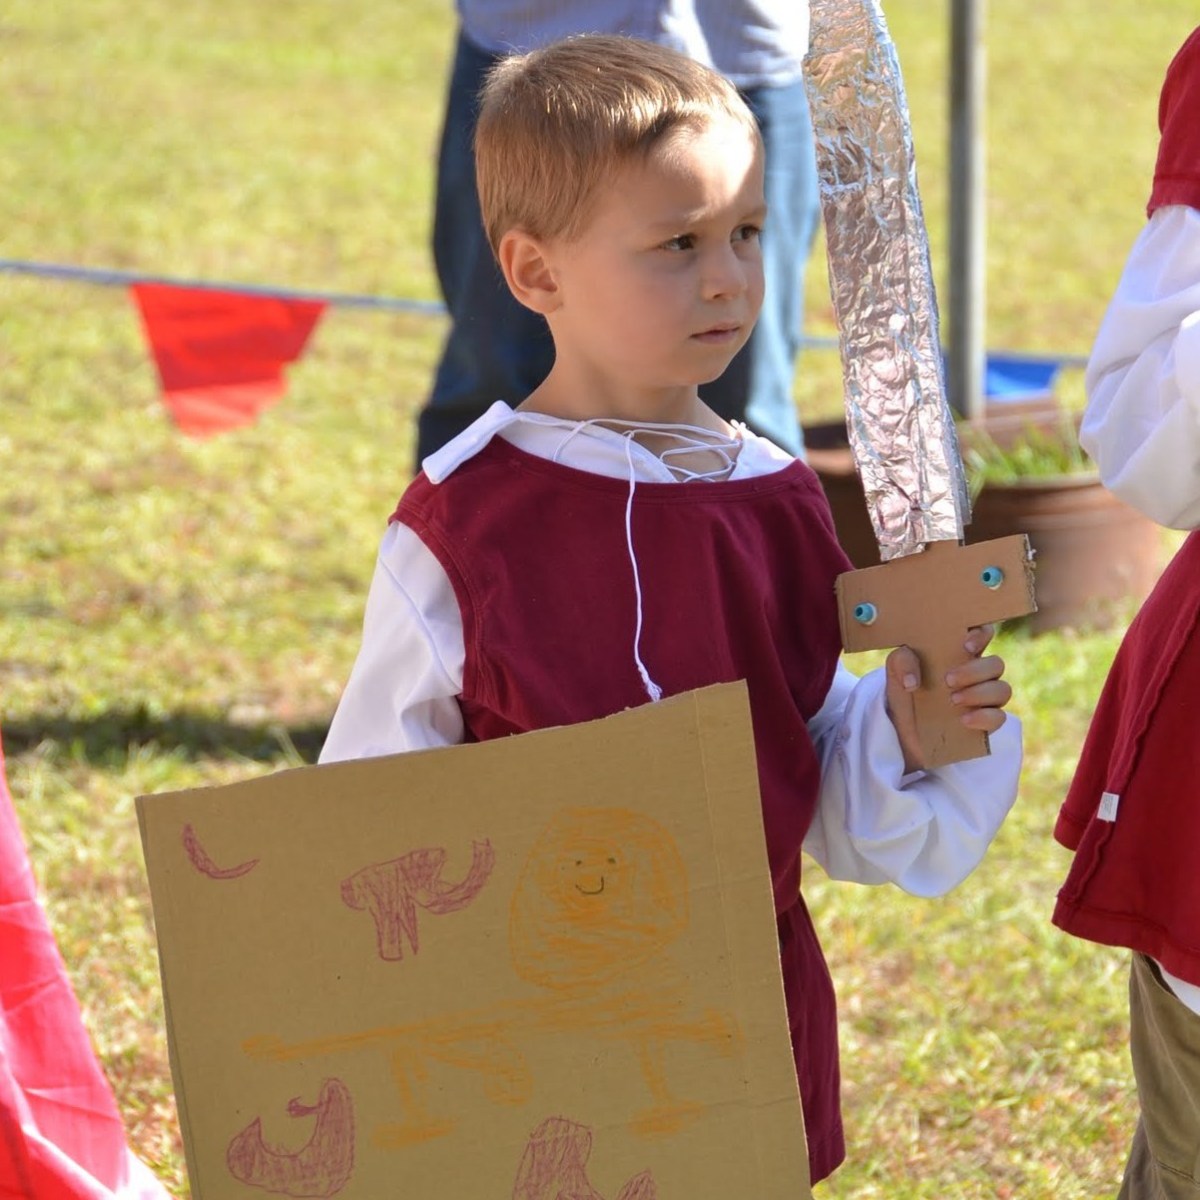 Knighting ceremony and joust from part 4 (or 5): Knights & Ladies Lesson